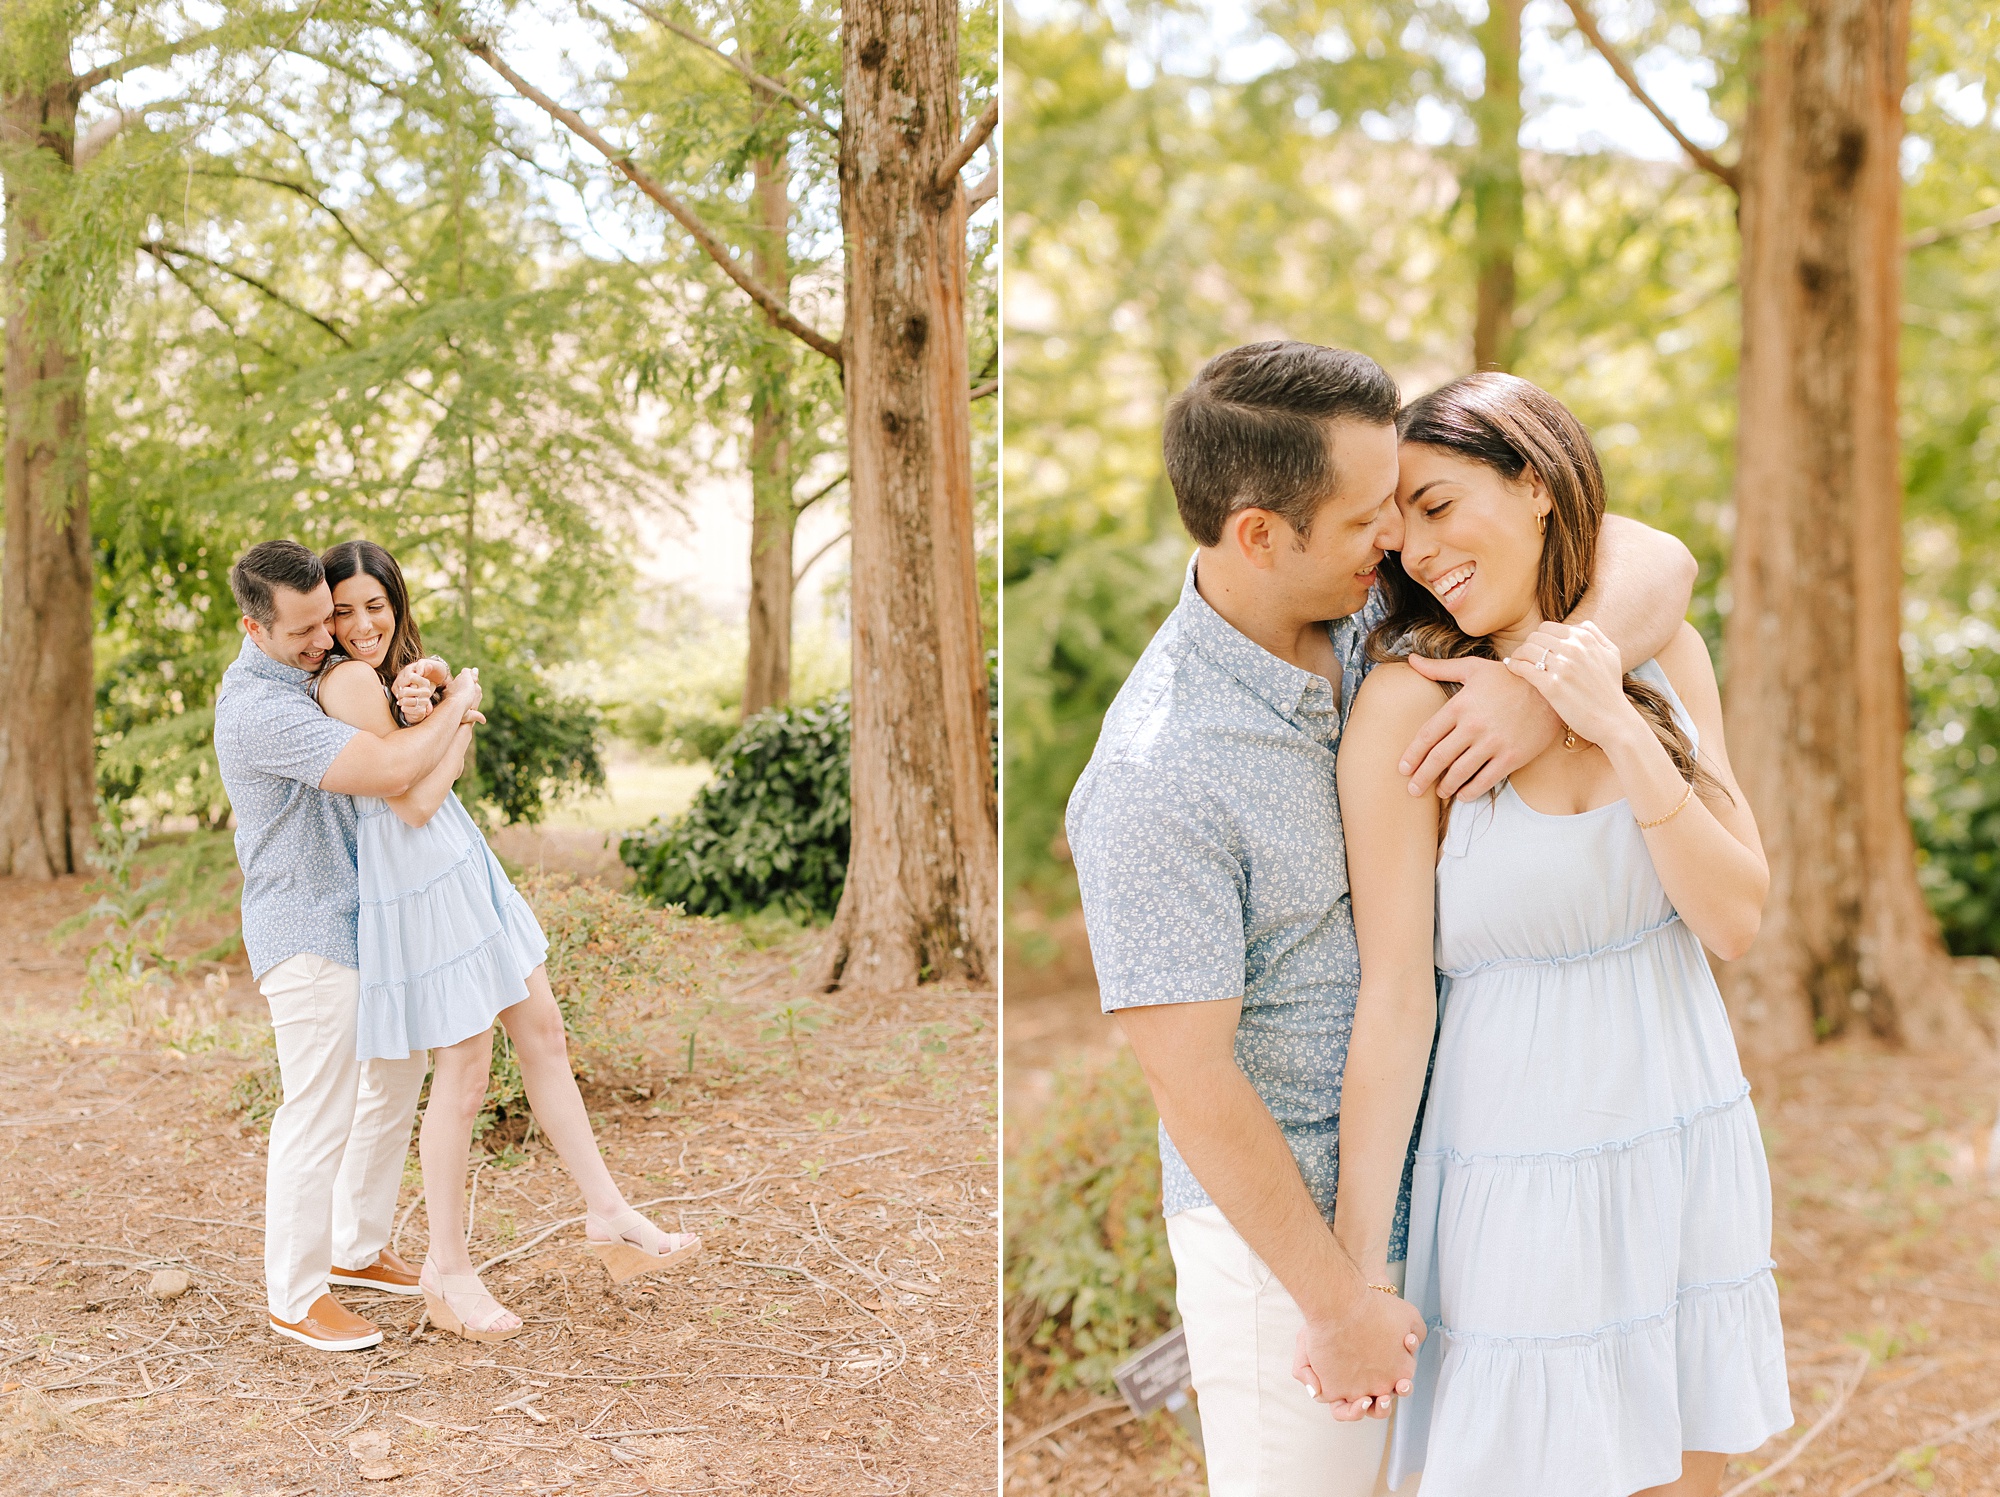 JC Raulston Arboretum engagement session in the spring with couple in blue outfits 